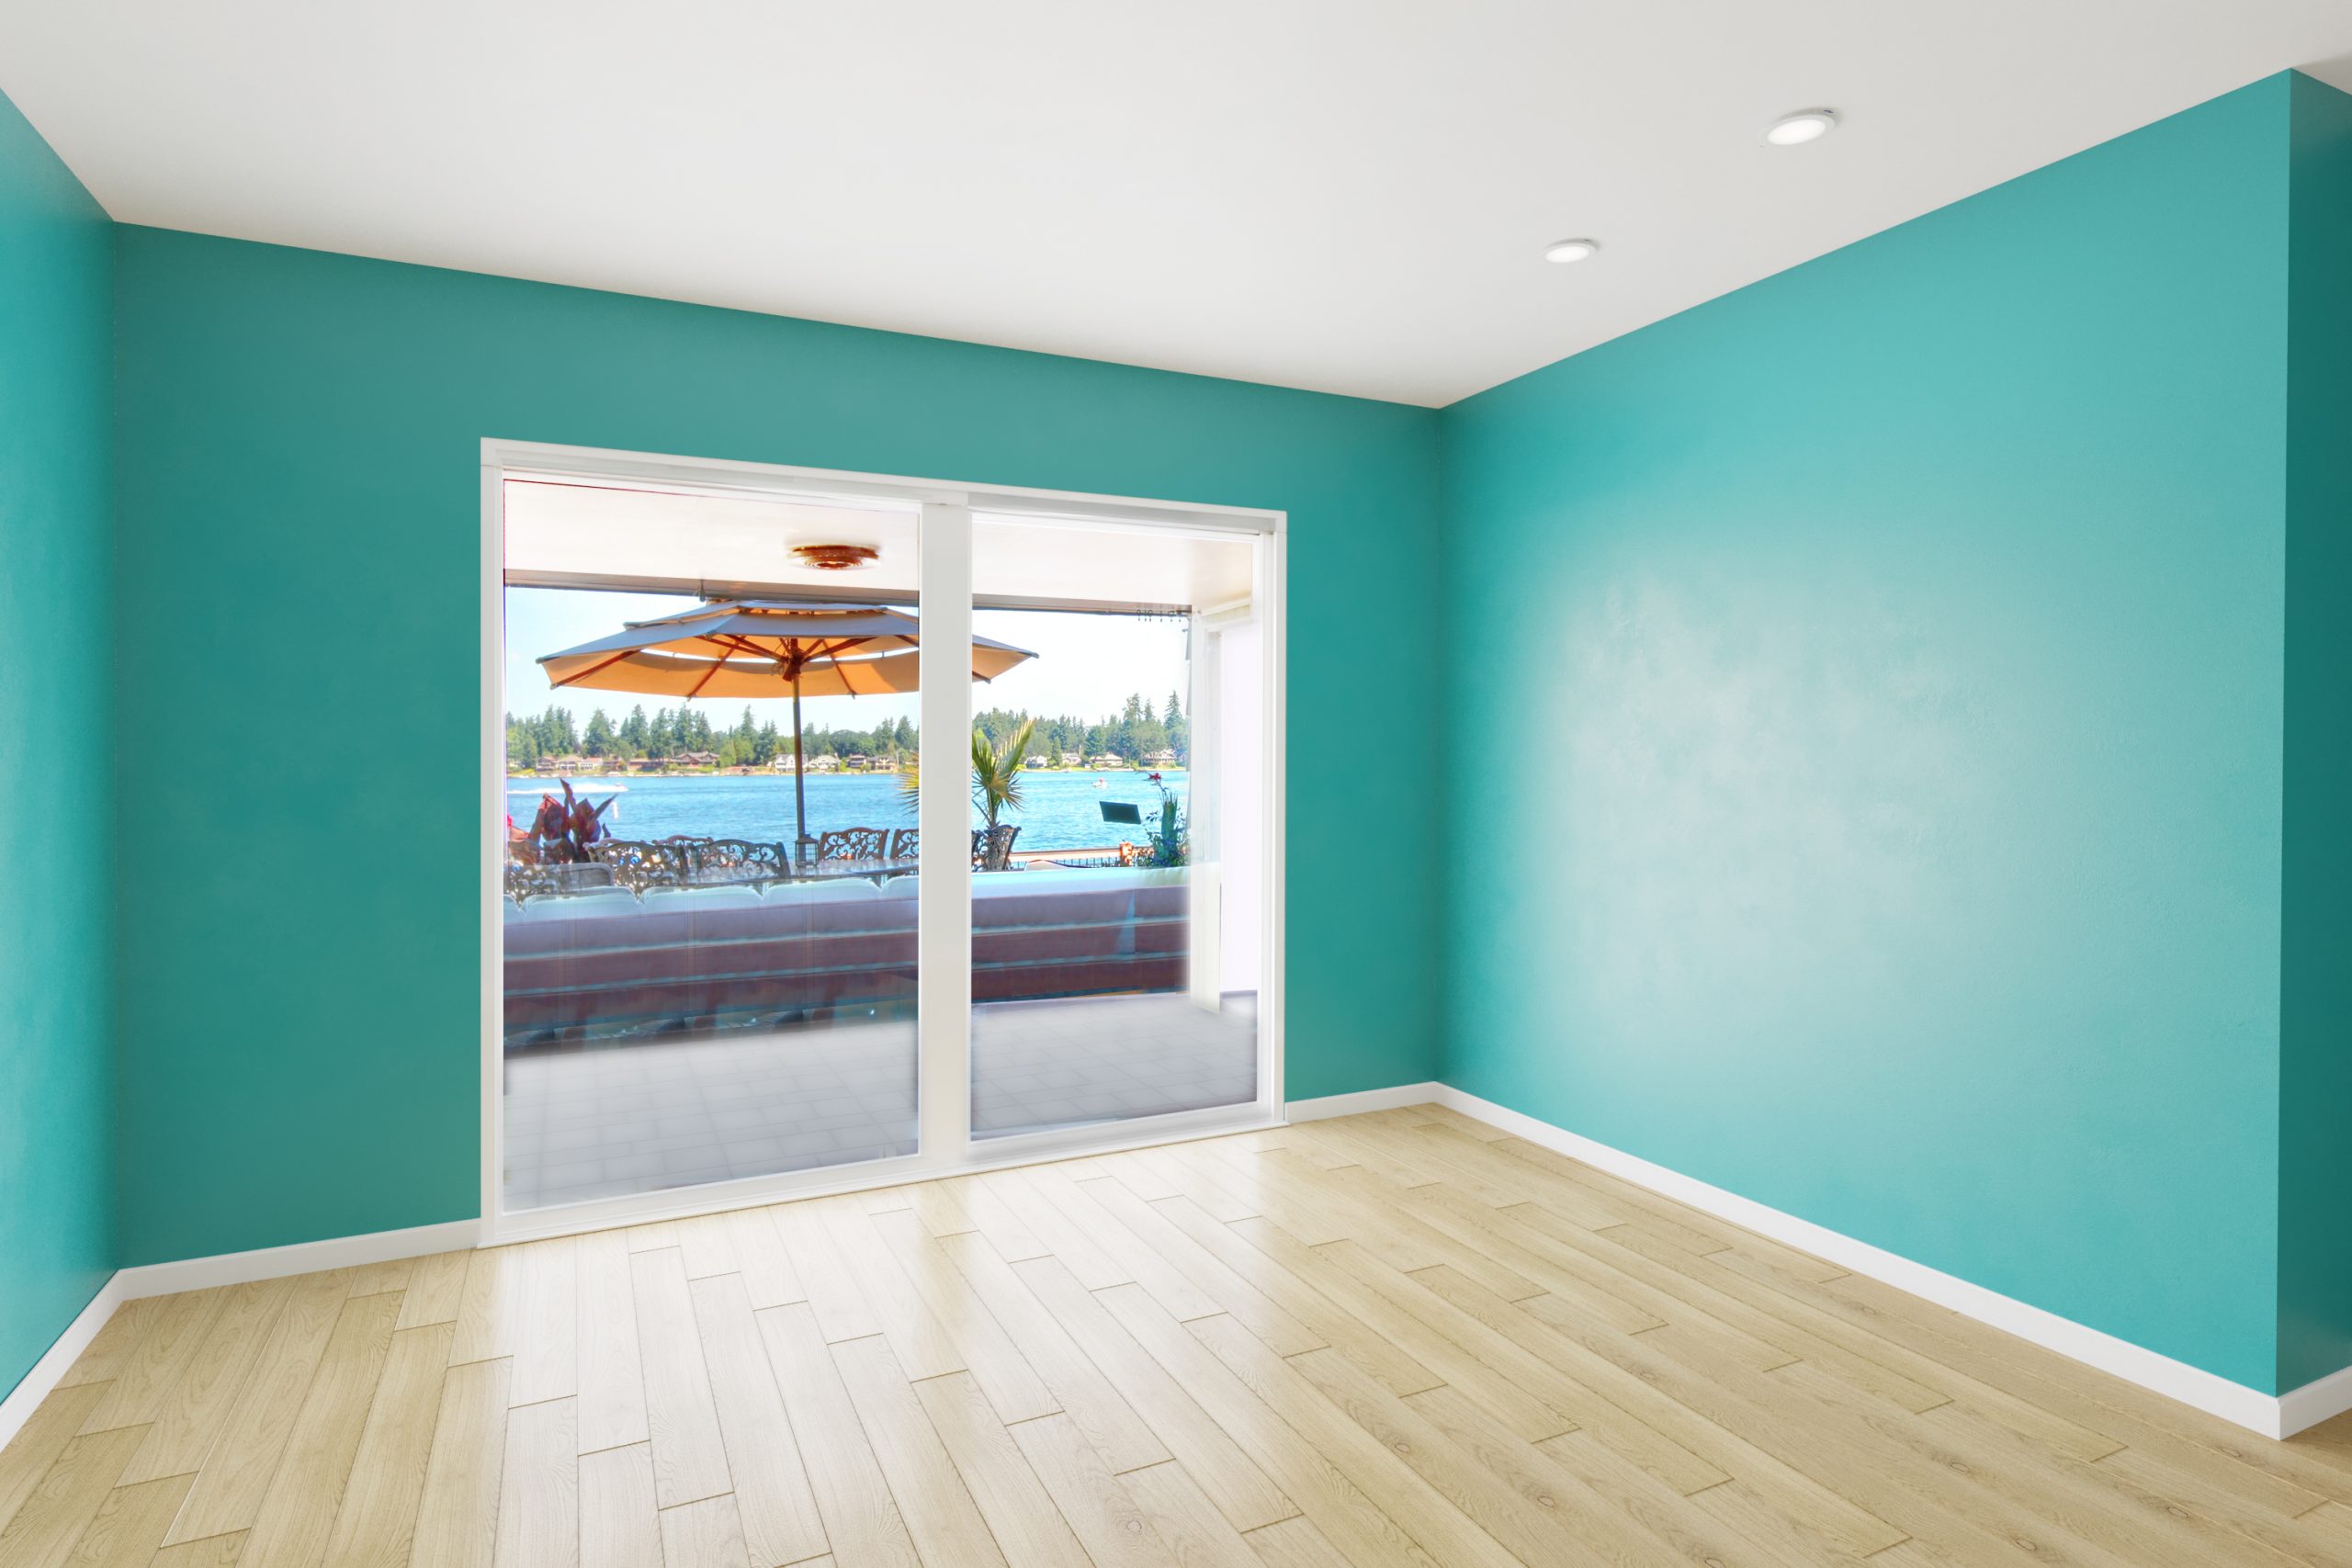 Small cozy beach side living room transformed with teal walls, no furniture